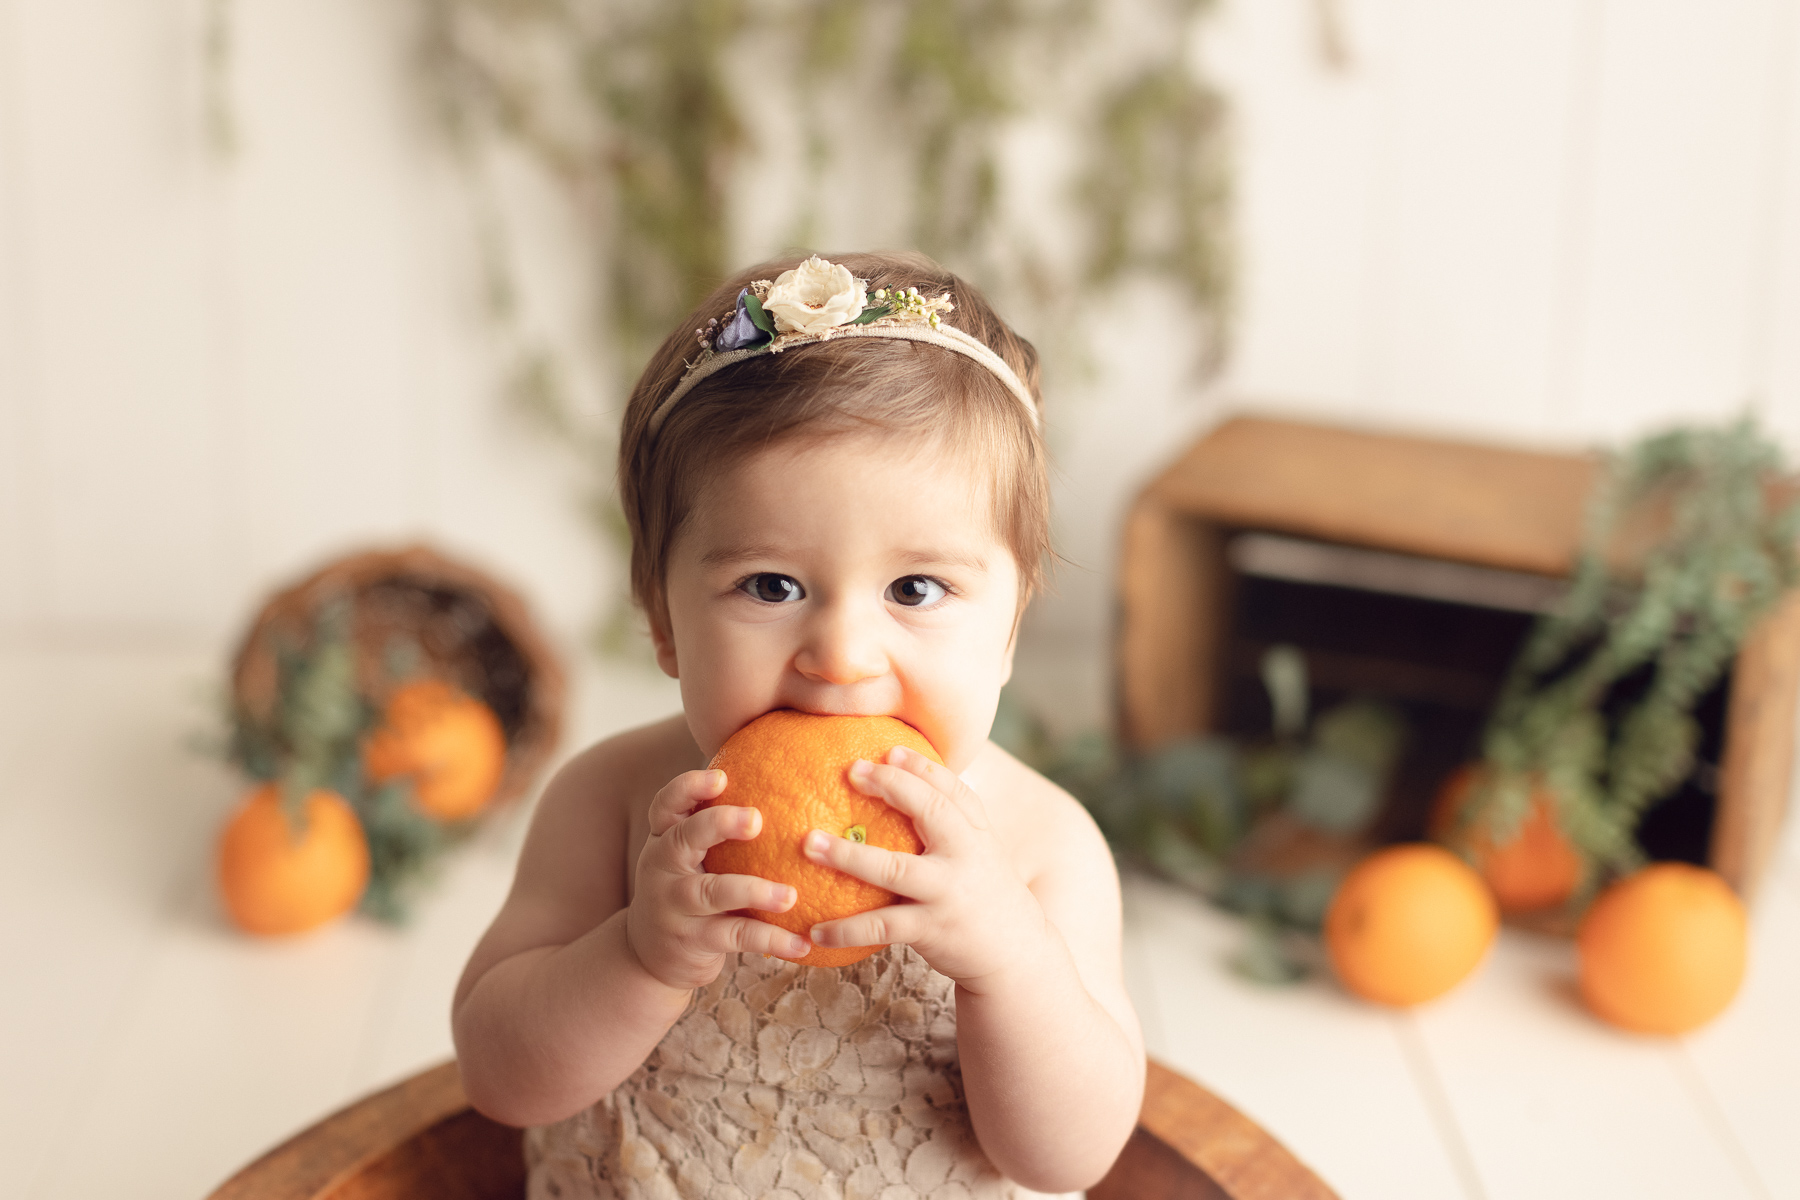 Cake smash photography Theme and preparation - Baby girl - Oranges - Baby photography vancouver